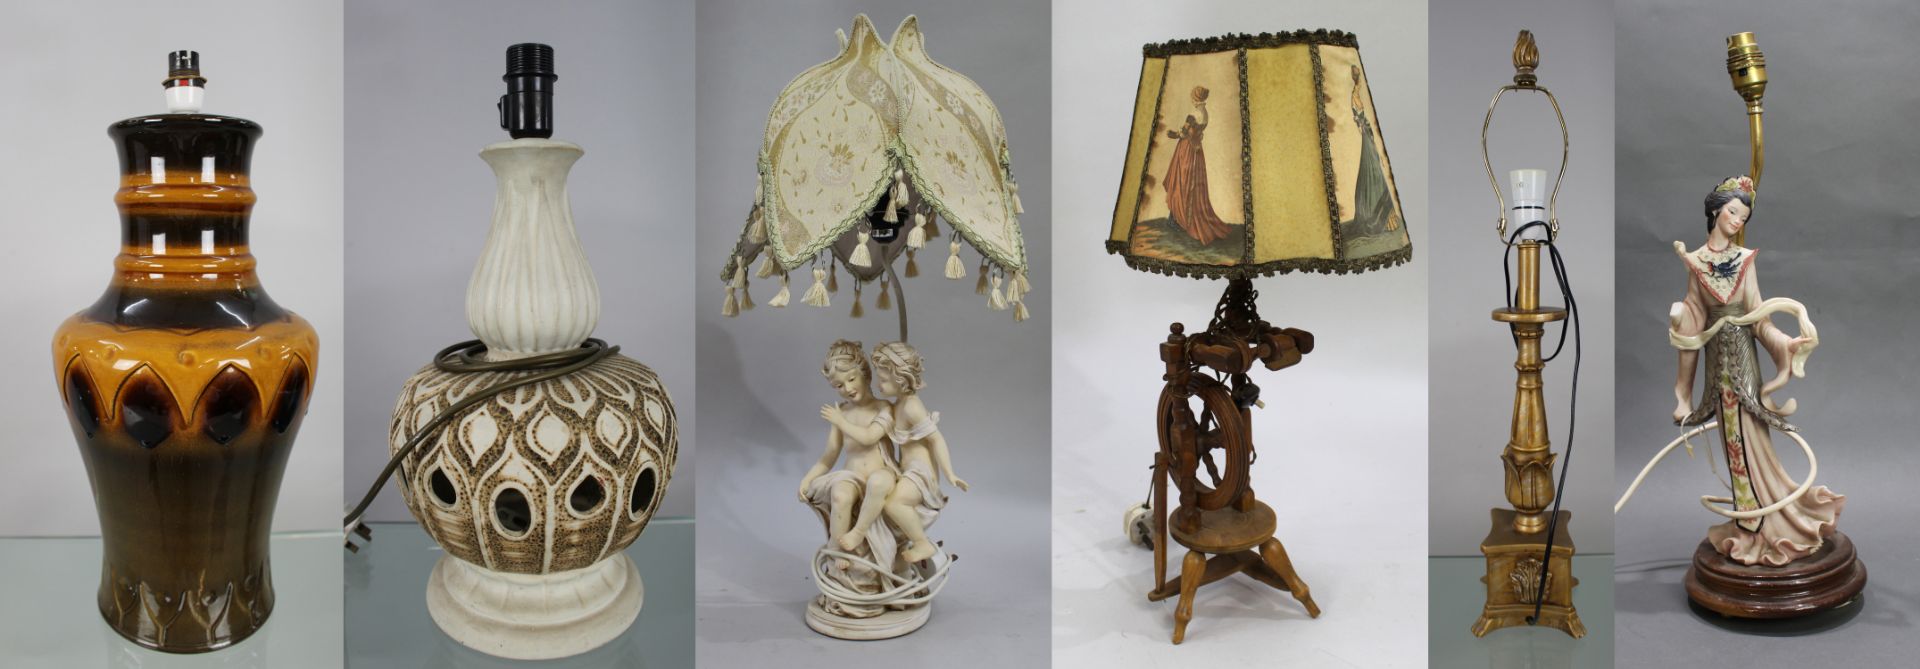 Collection of 6 Vintage Table Lamps